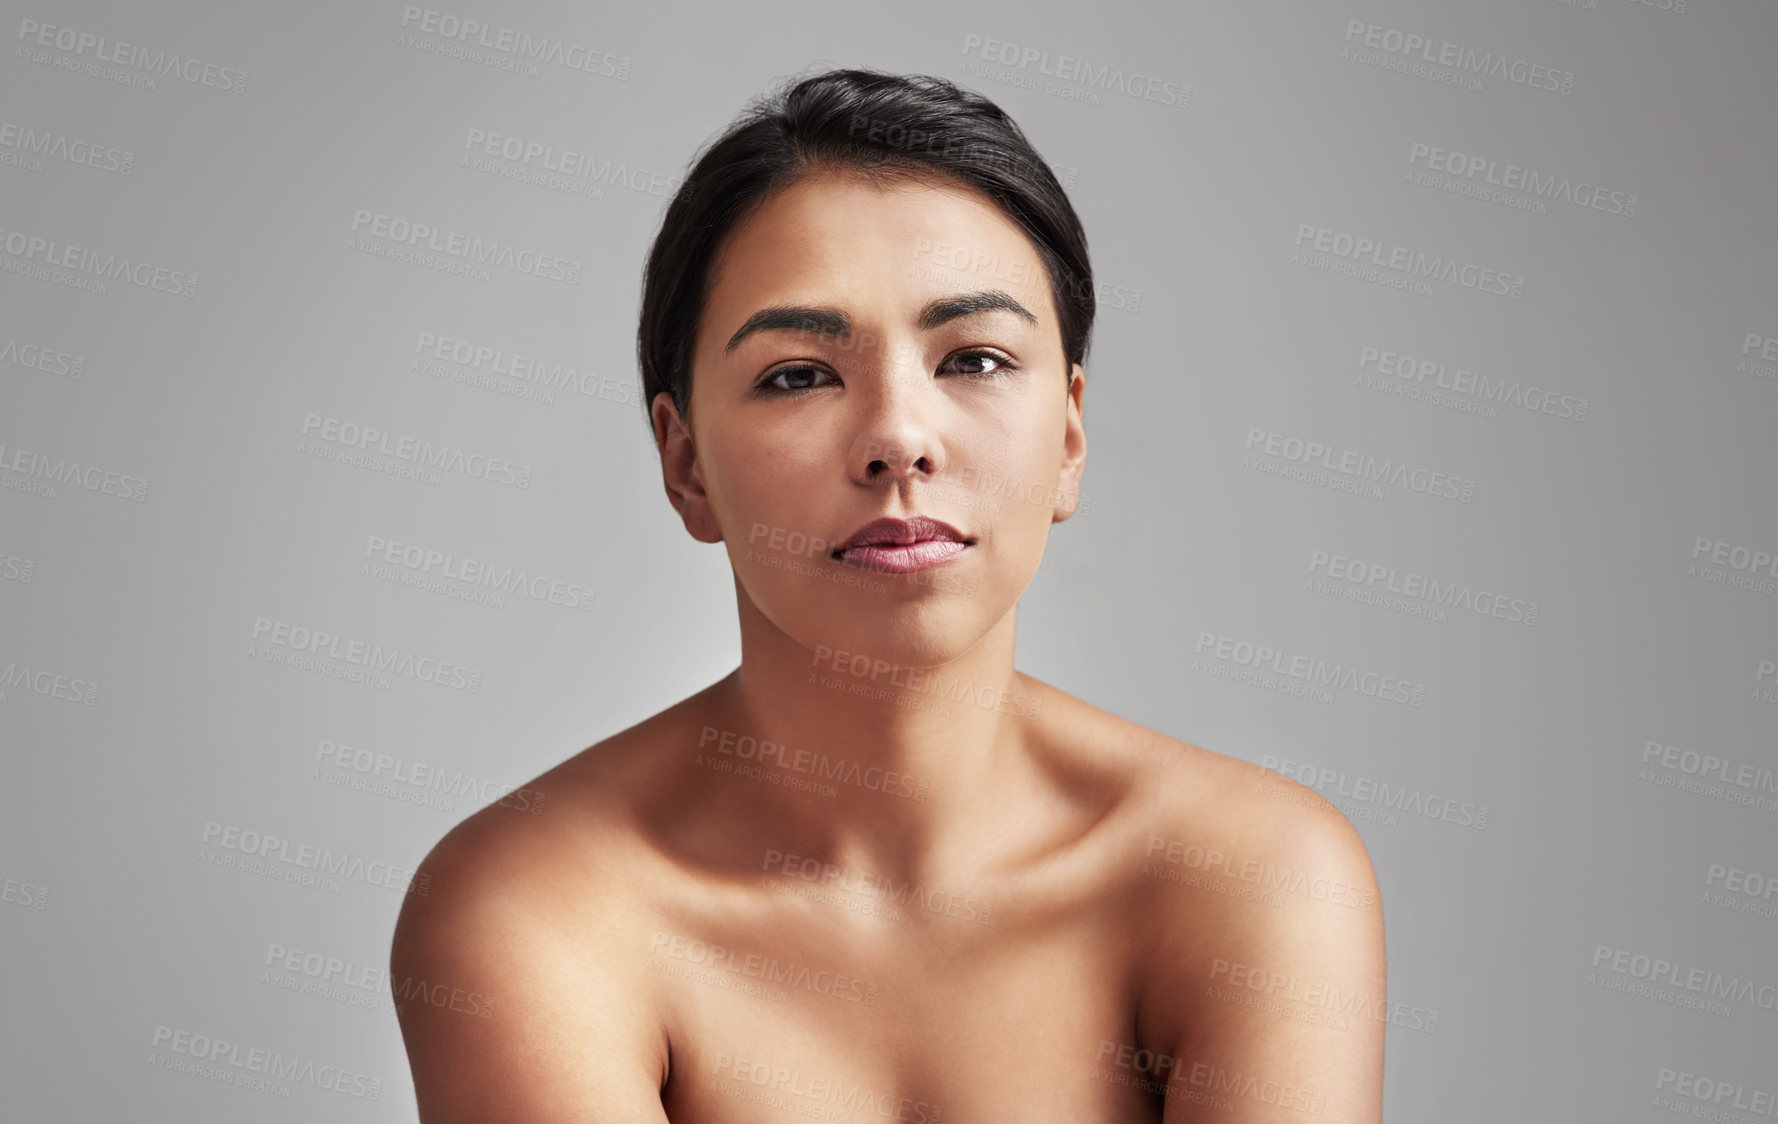 Buy stock photo Studio shot of a young woman with wet hair posing against a gray background